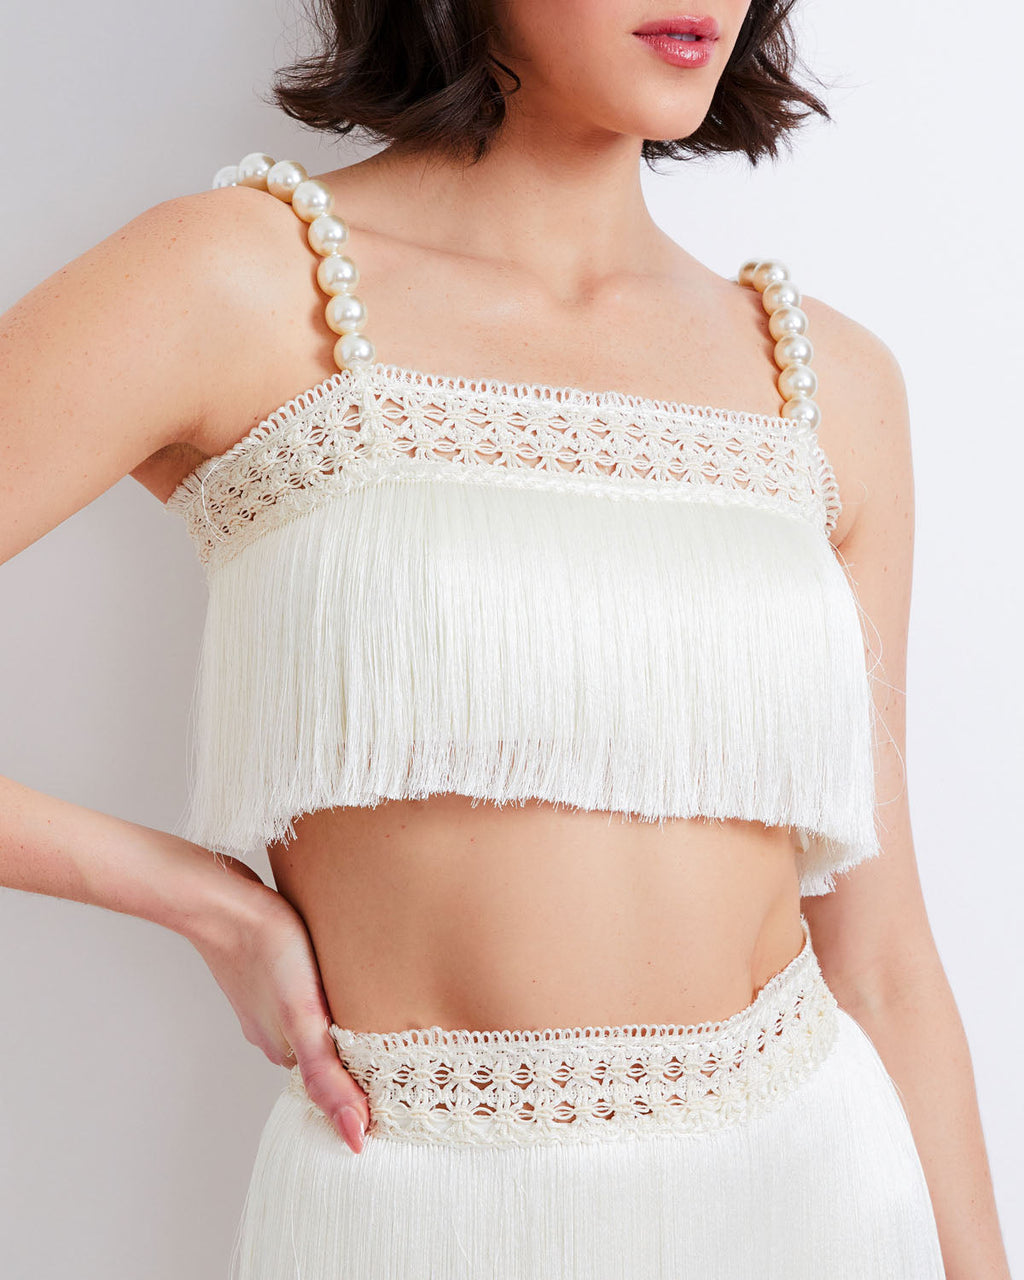 PatBo All-Over Fringe Top with Pearl Beaded Straps – Cattivo